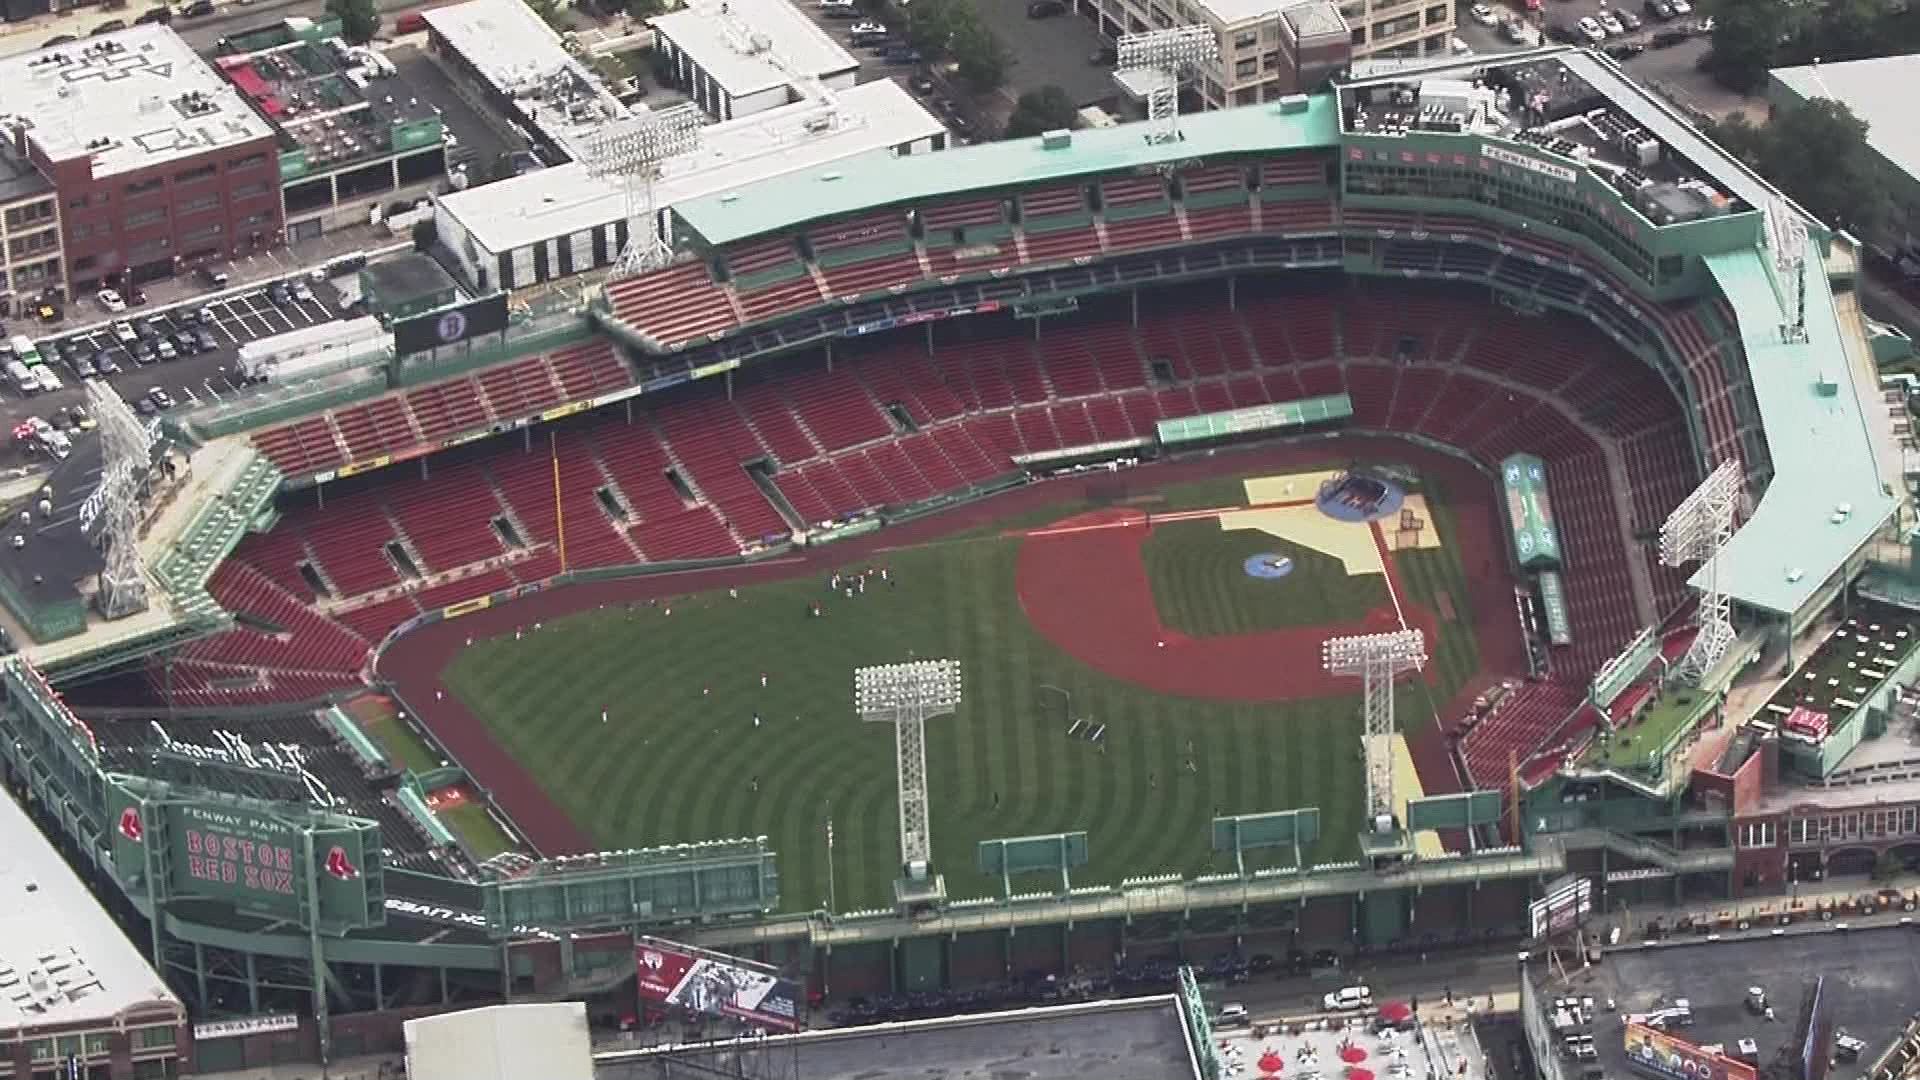 Here's what inside Fenway Park looks like on Opening Day 2020